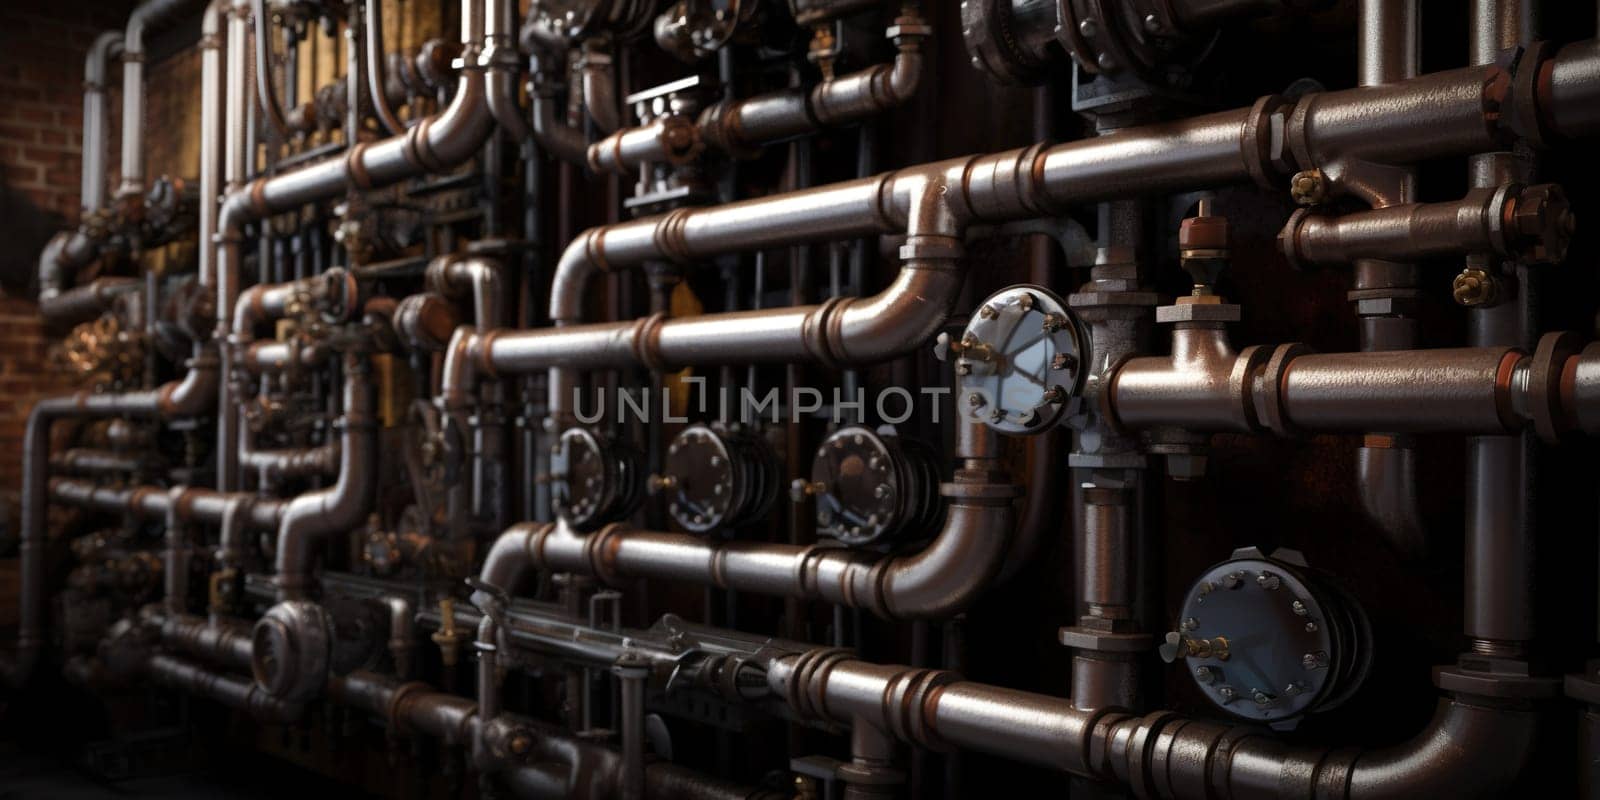 Heating And Water Pipes On The Wall In The Boiler Room